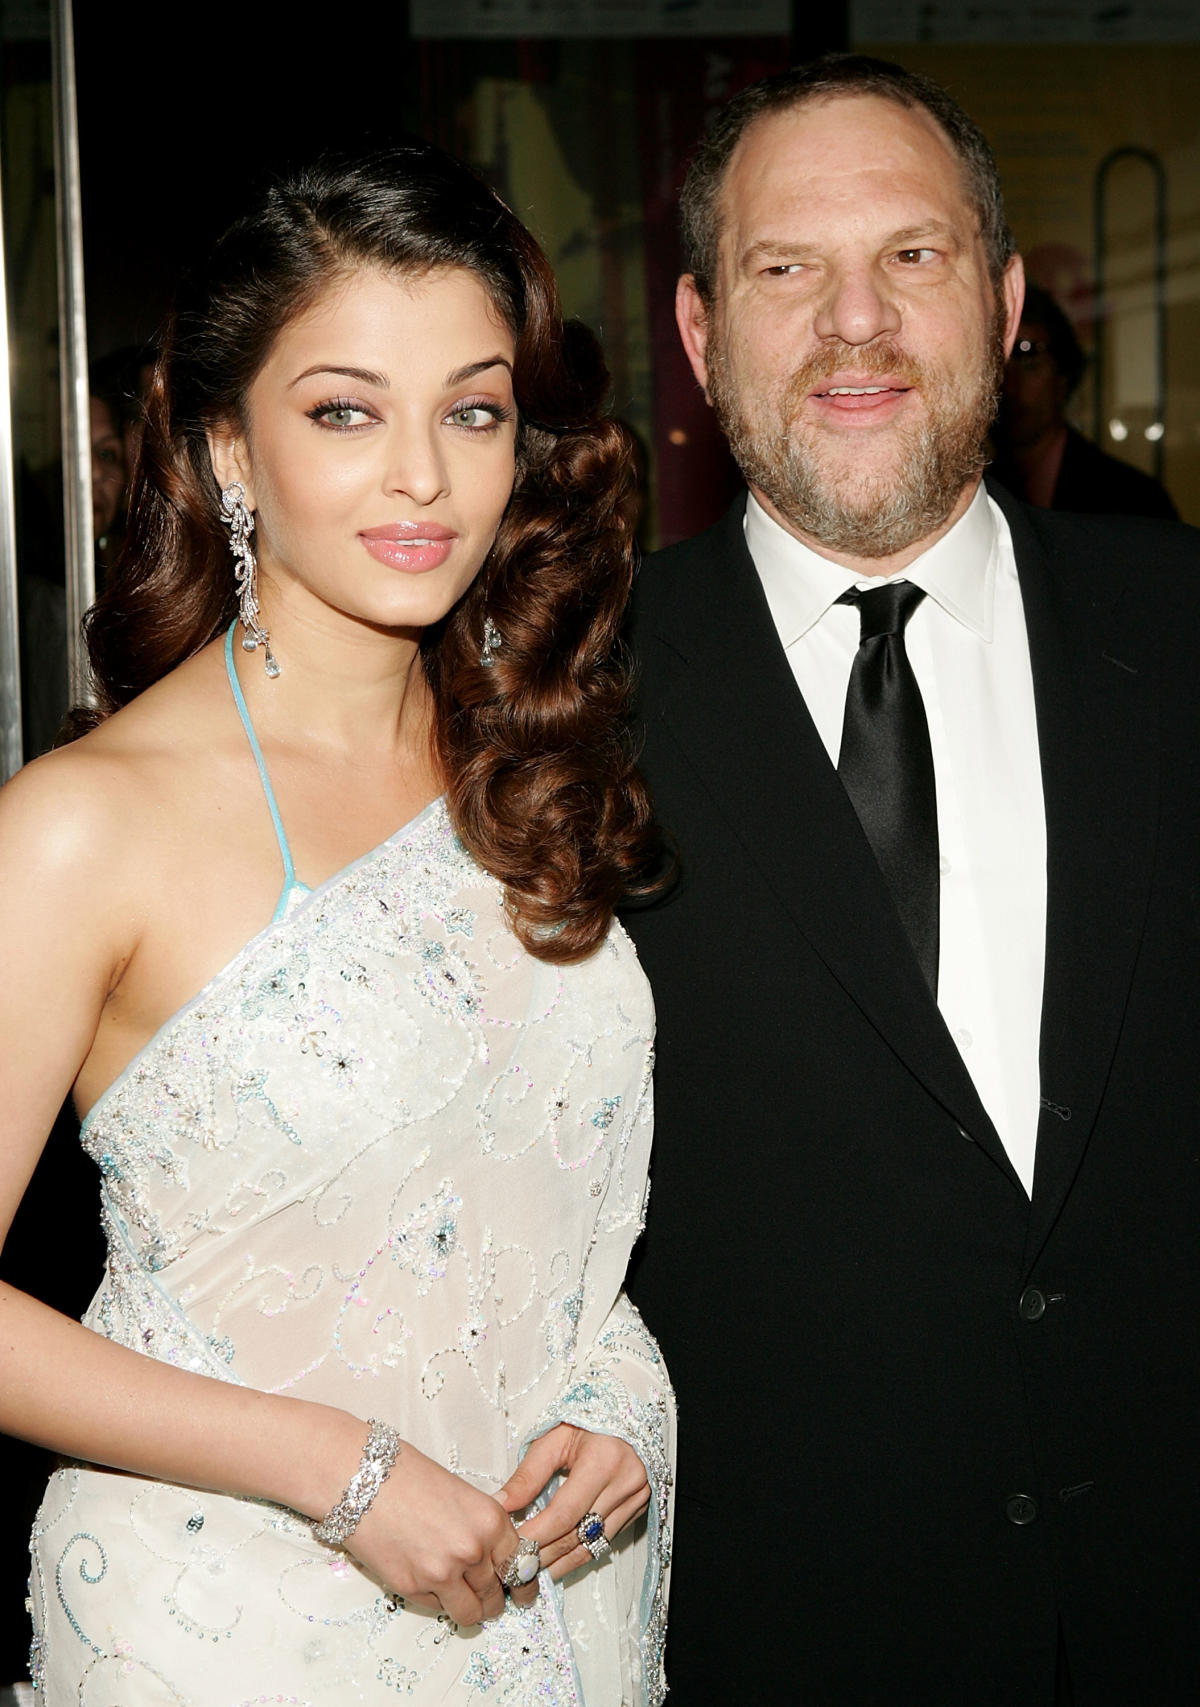 Aishwarya Rai's former manager talks shutting down 'pig' Harvey Weinstein:  'His threats didn't bother me at all'